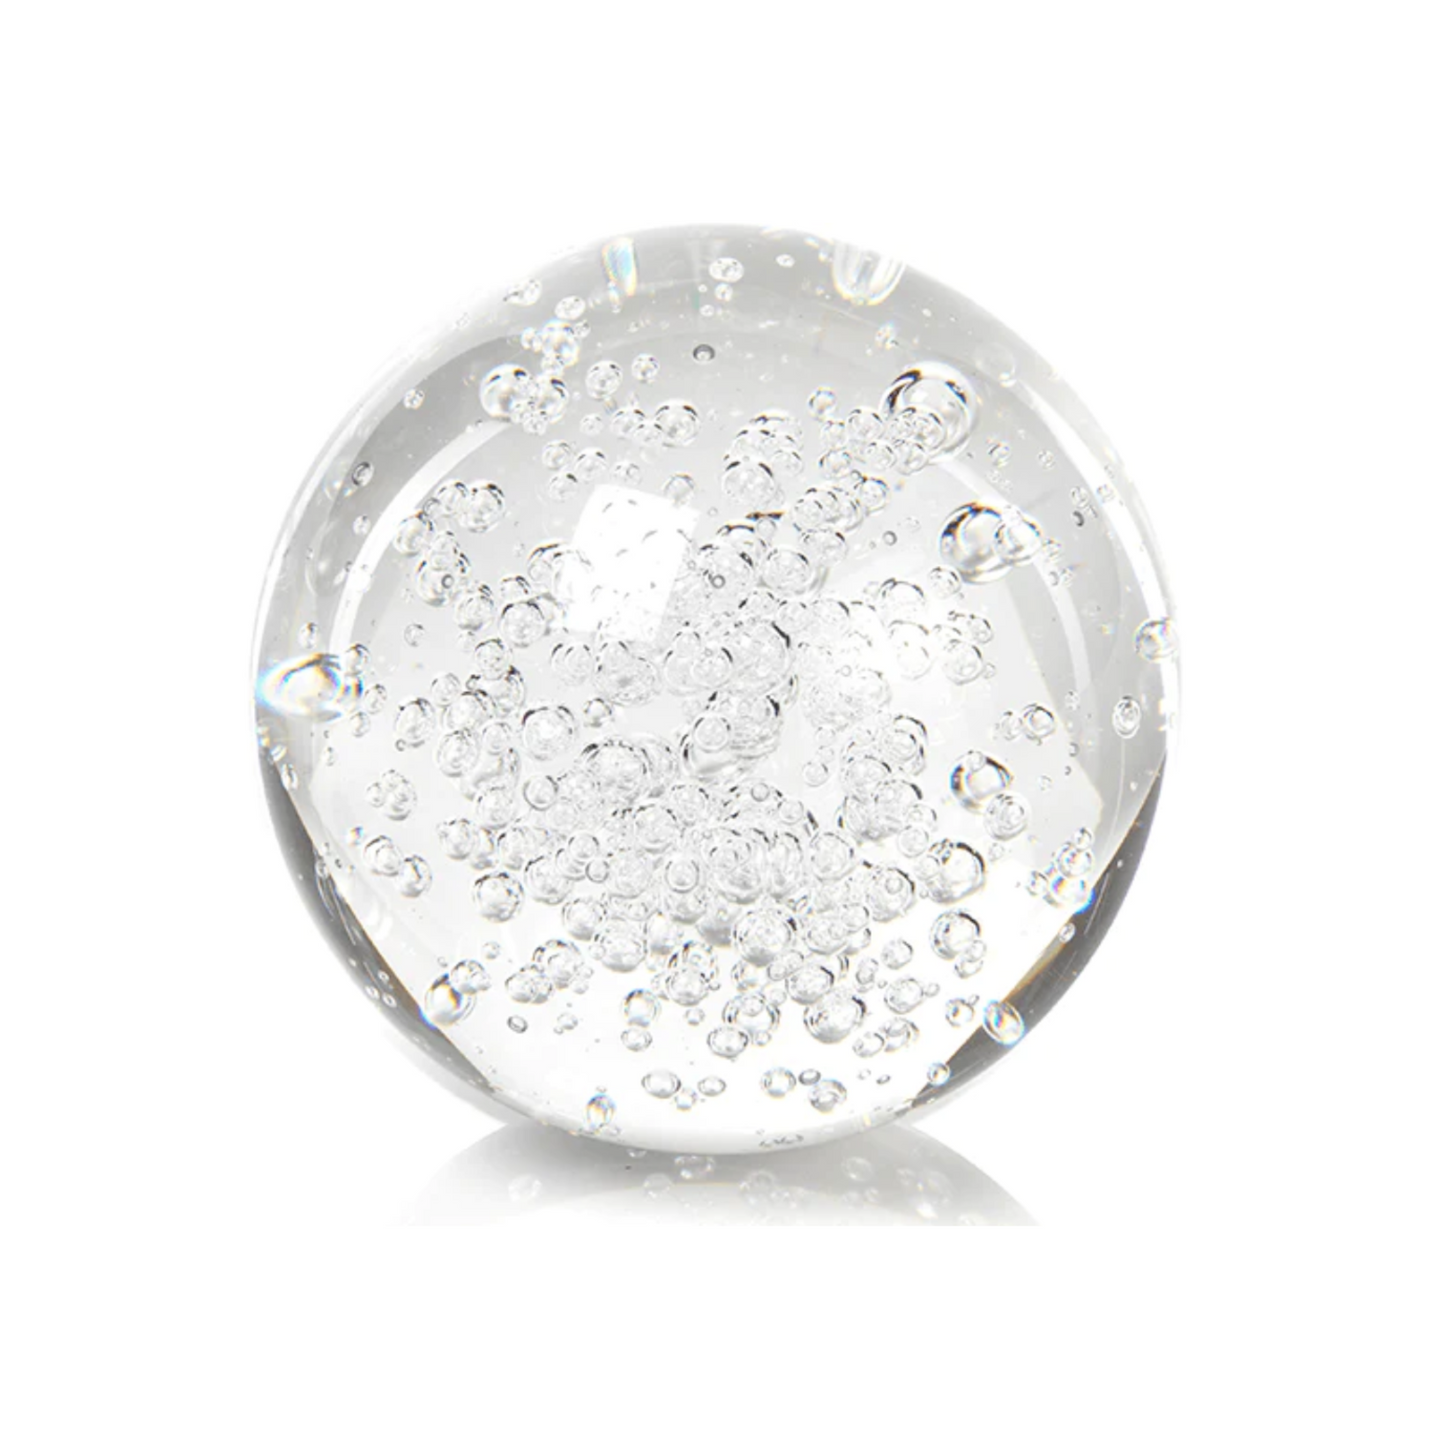 Glass Ball with Bubbles